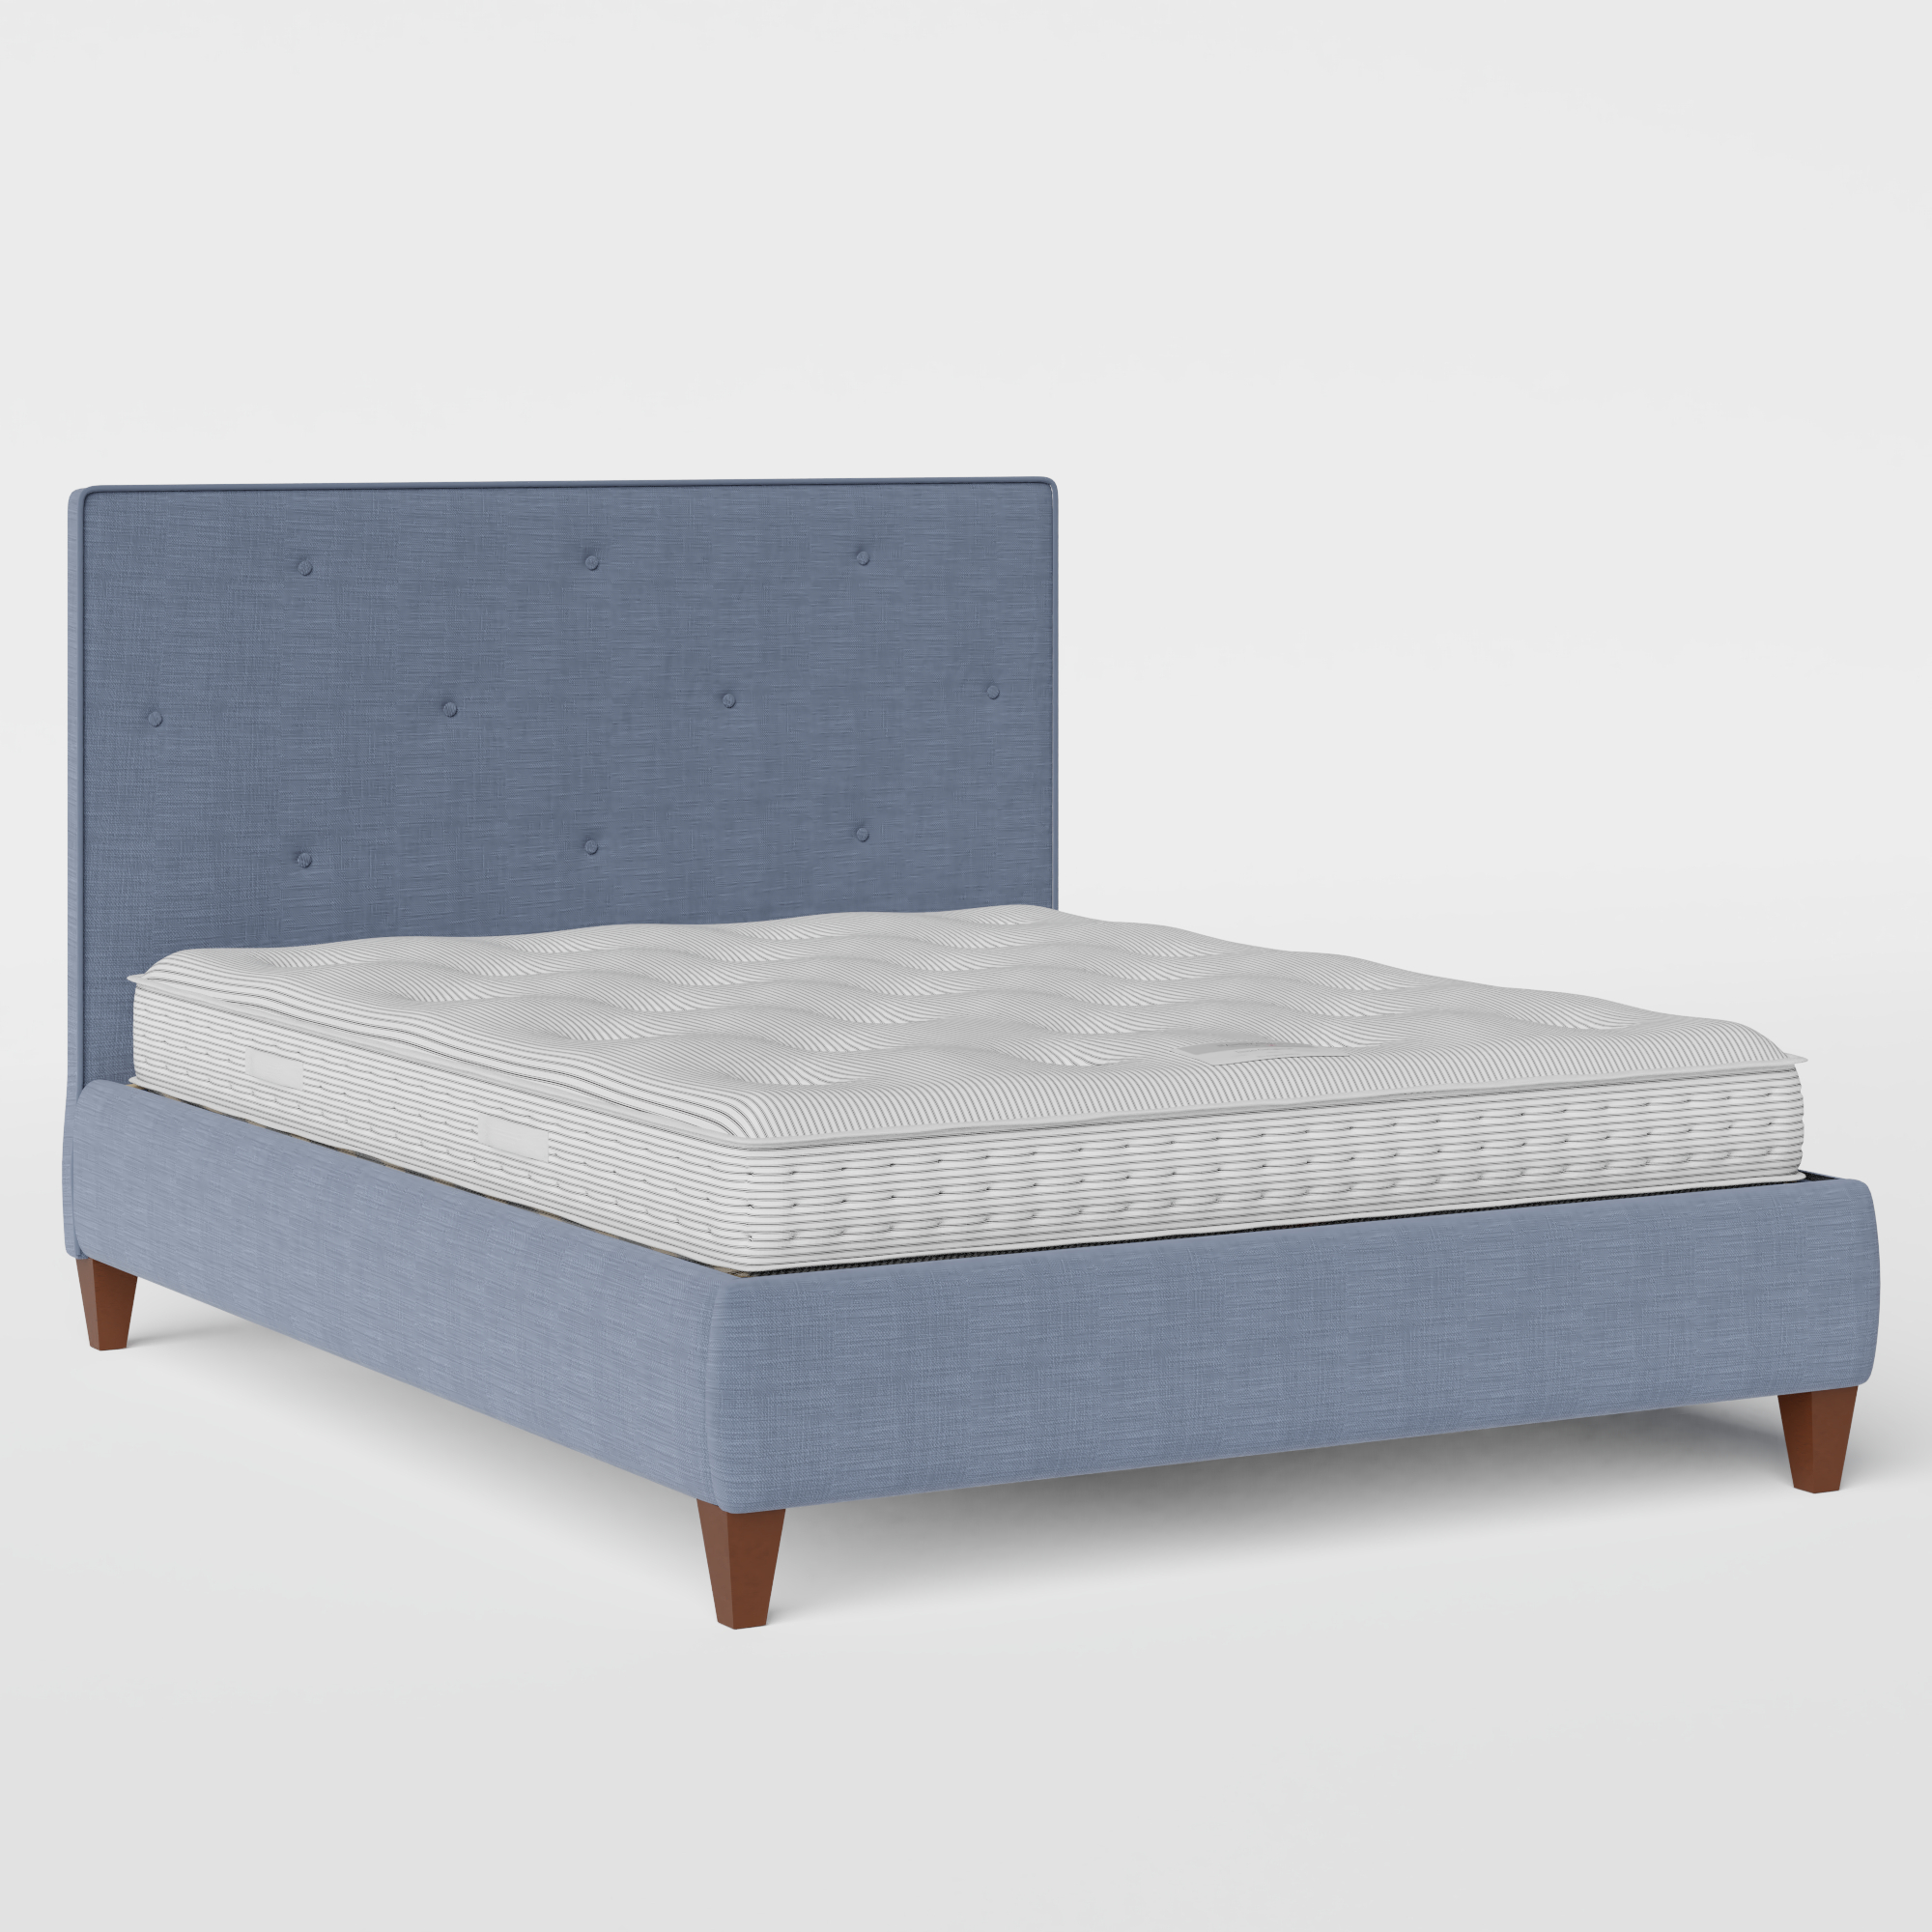 Yushan Buttoned Diagonal upholstered bed in blue fabric